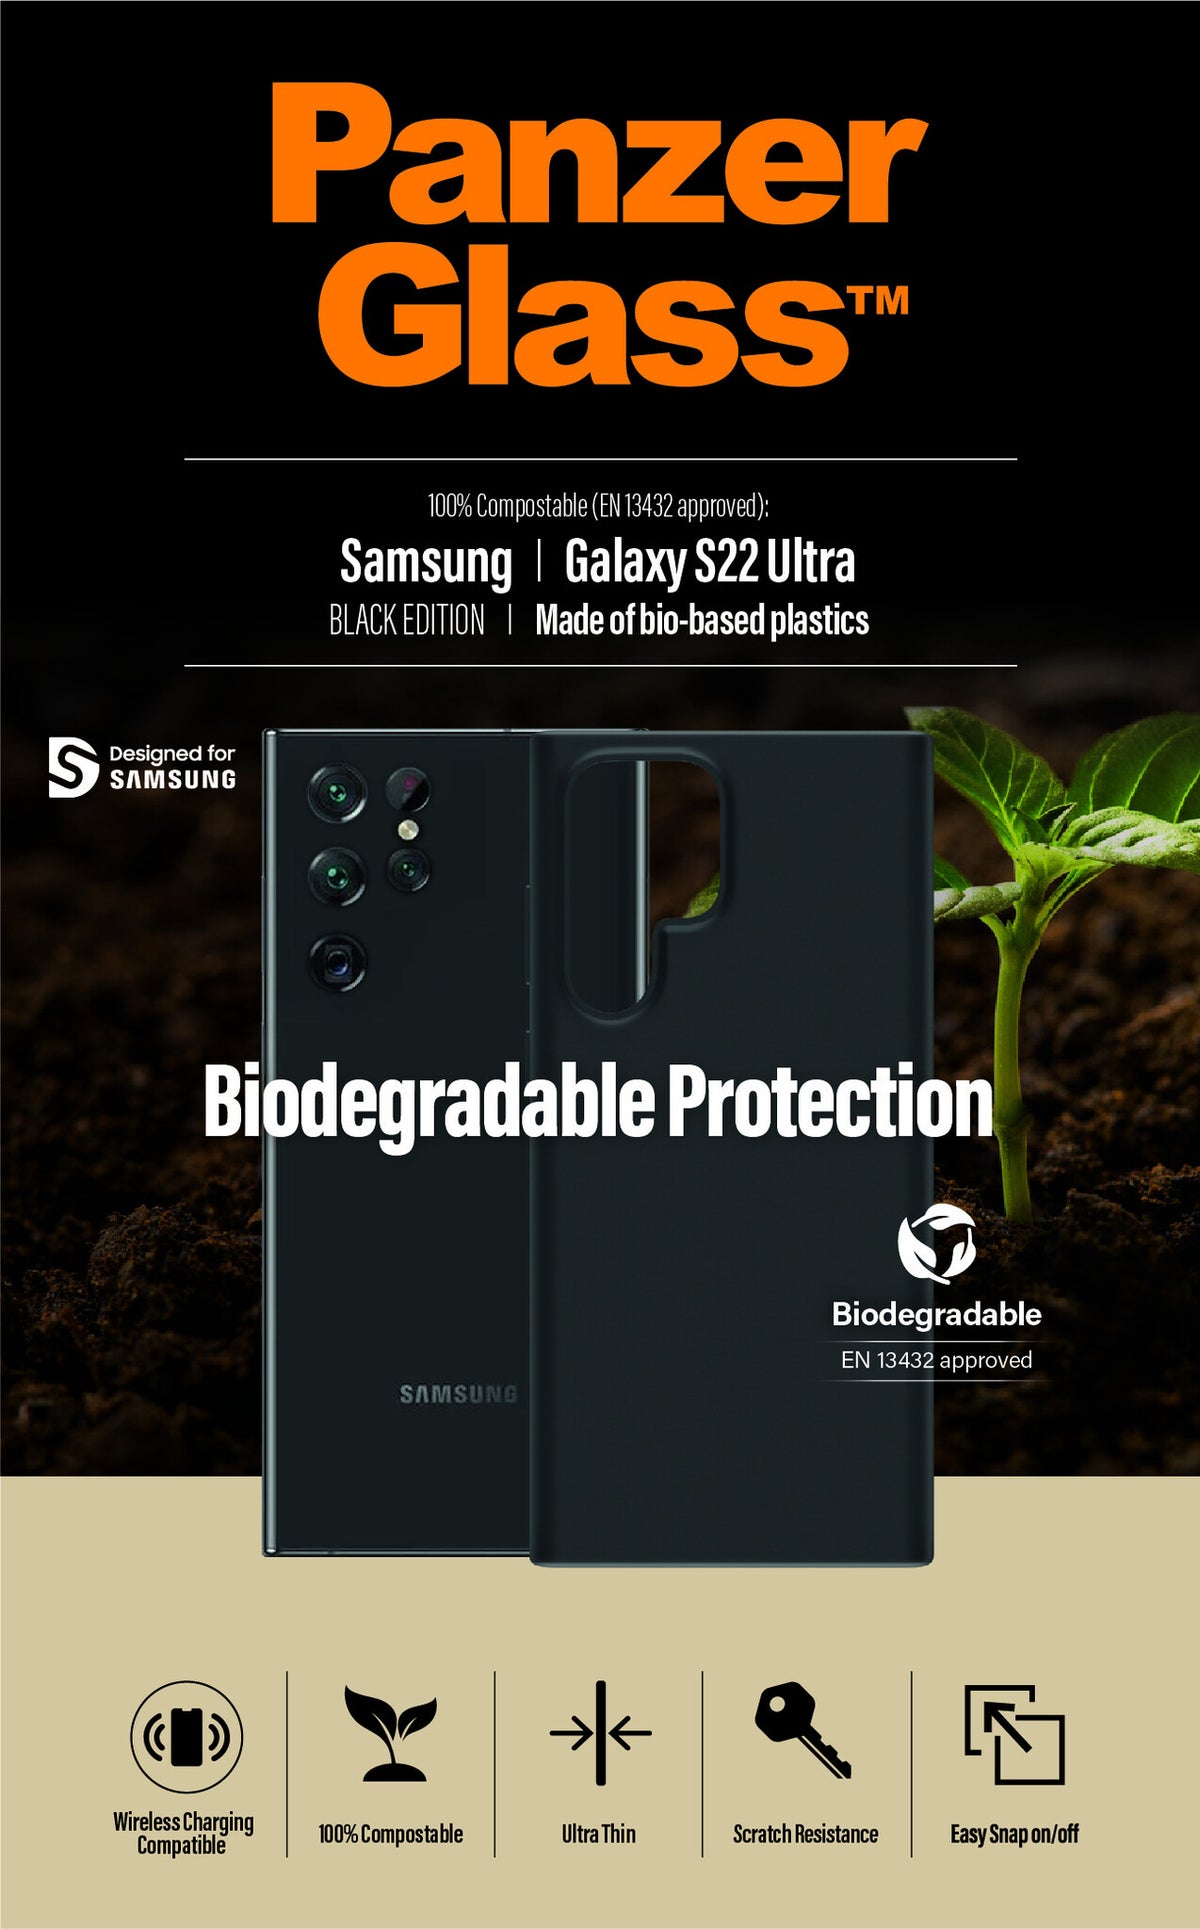 PanzerGlass ® Biodegradable Case for Galaxy S22 Ultra in Black